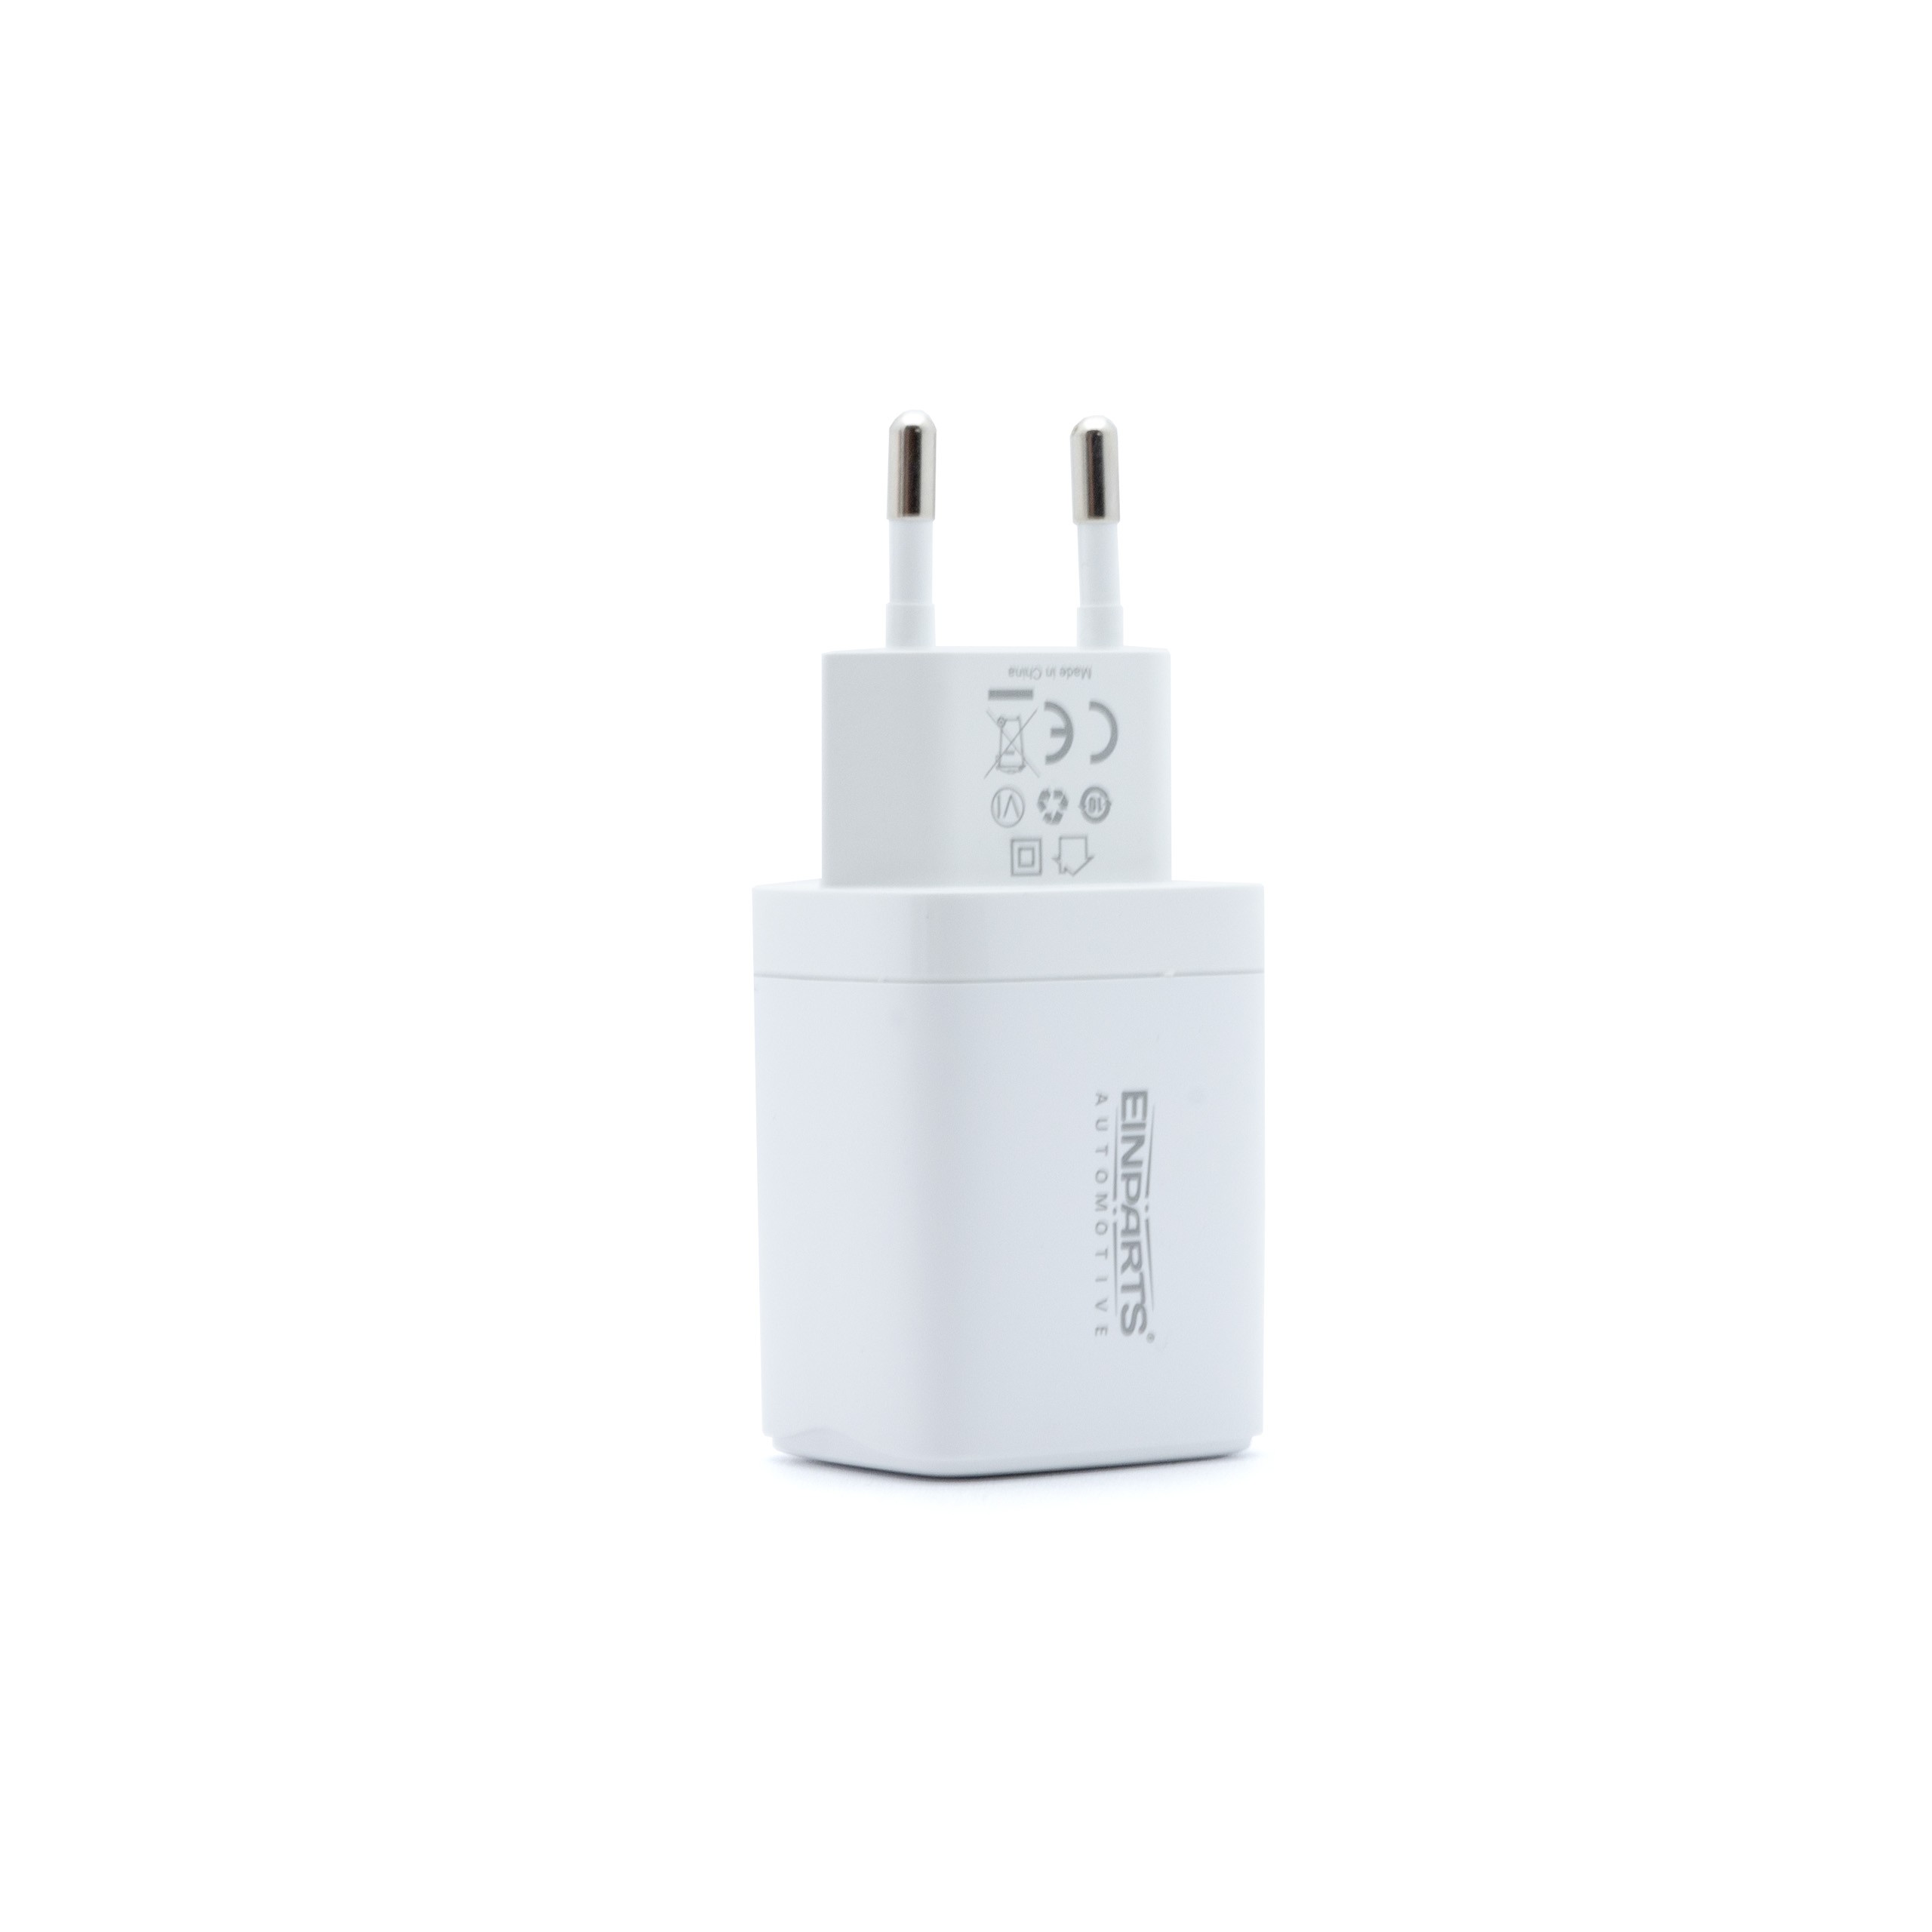 EPACC015 QUICK CHARGER